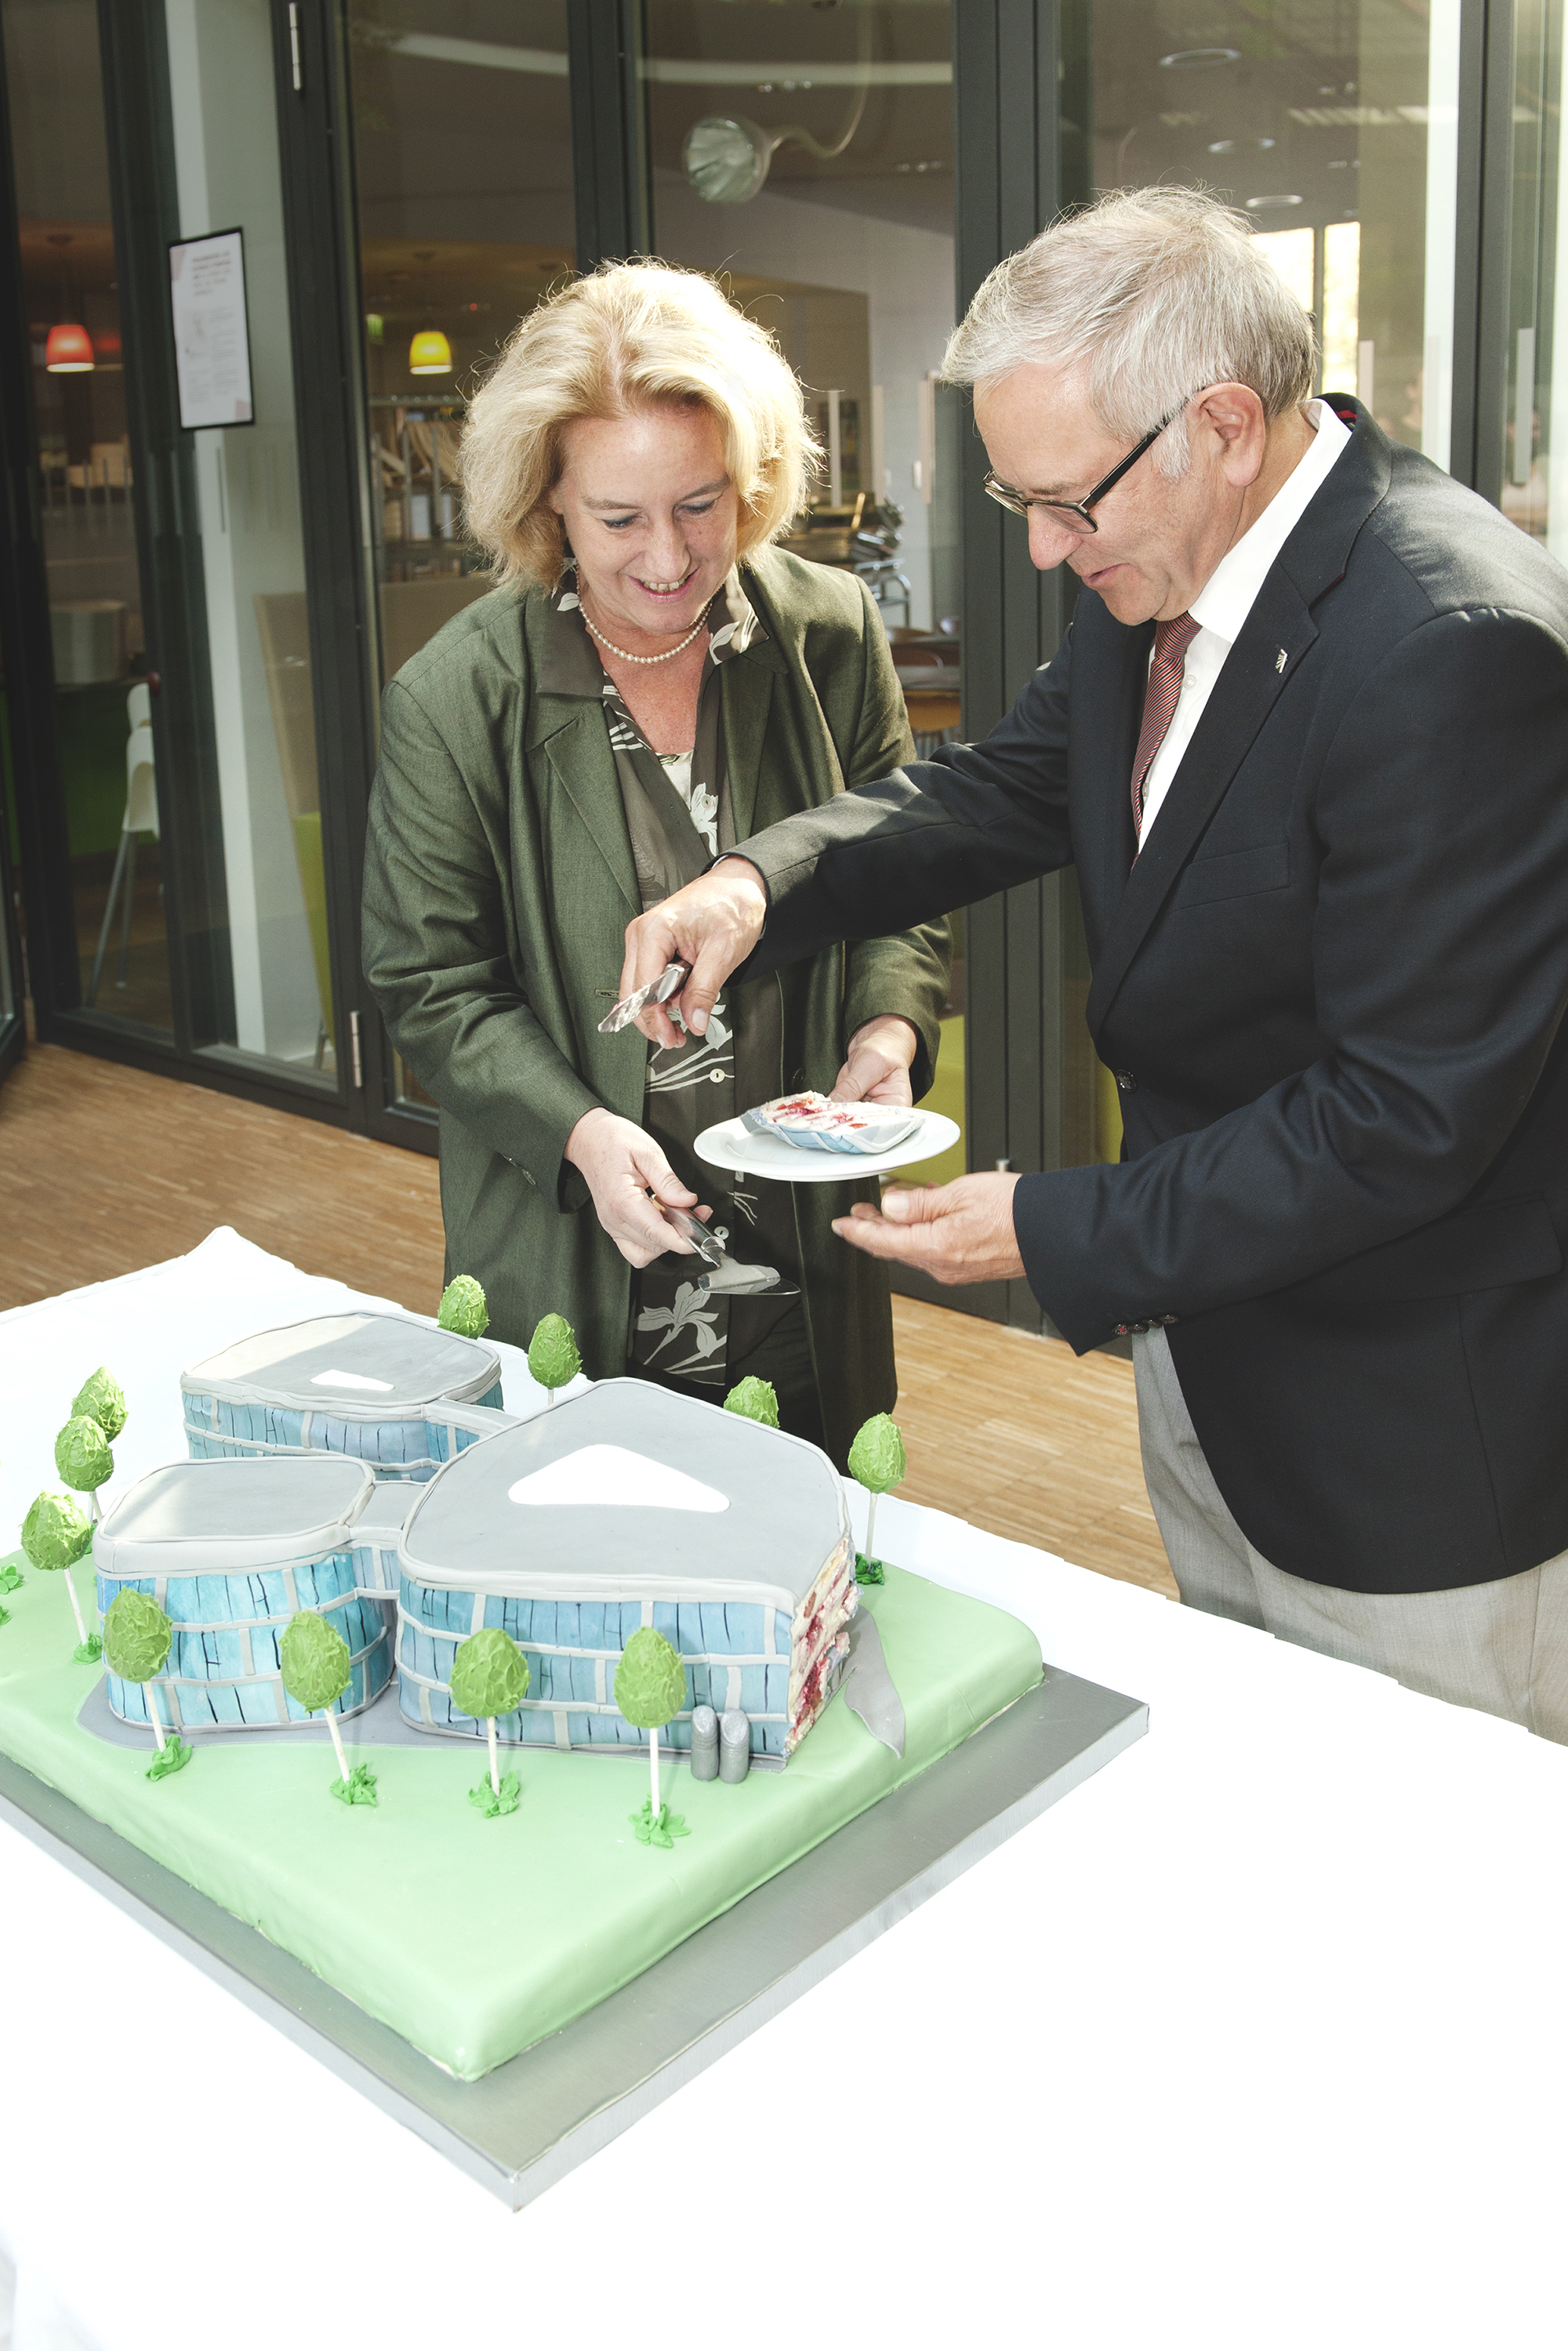 The executive director of the institute, Professor Ulrike Köhl and institute founder Professor Frank Emmrich cut the cake for the festive event. As a special eye-catcher it was designed in the form of the Leipzig institute building.